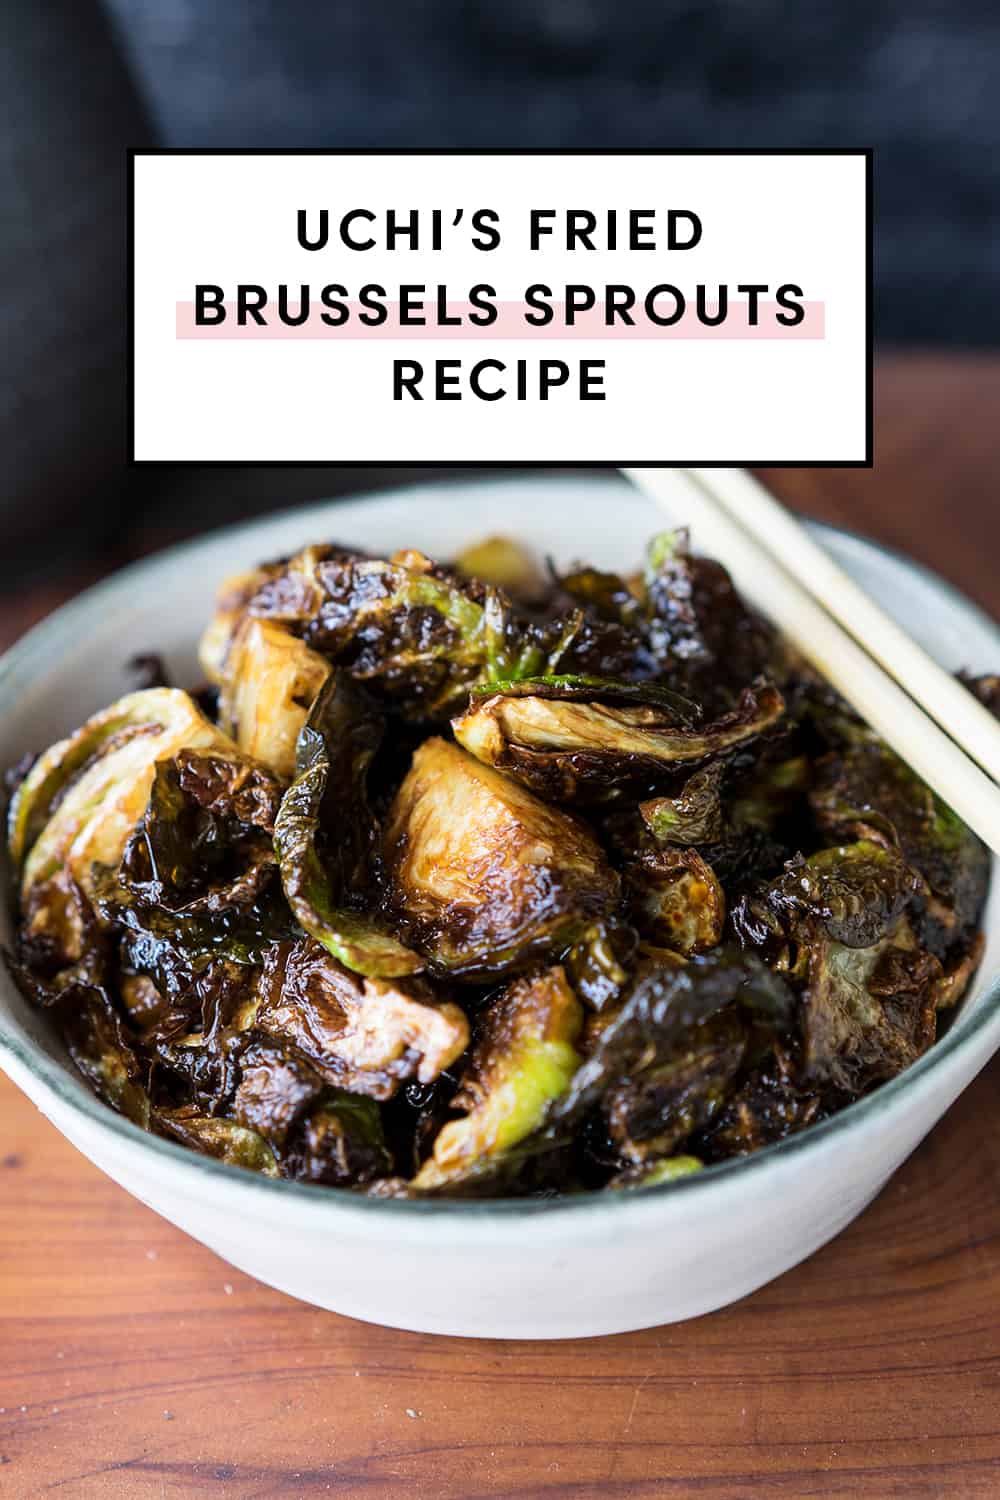 Uchi's Fried Brussels Sprouts Recipe